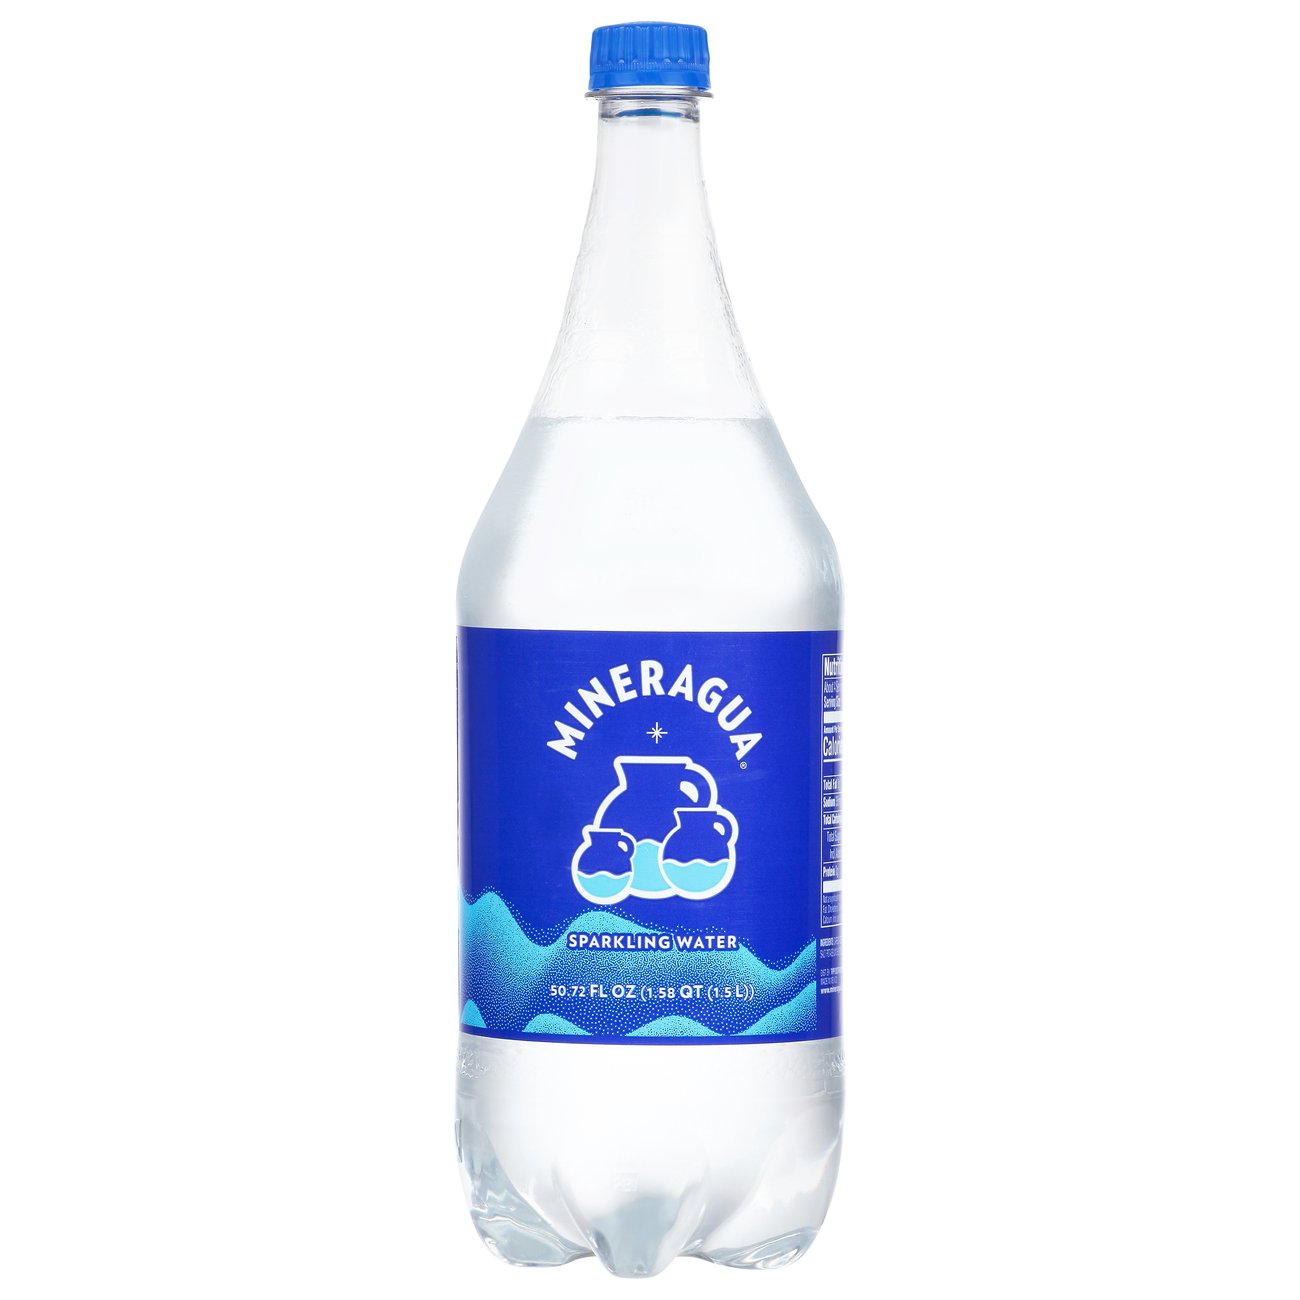 Mineral Water Mineragua - Jarritos Mineral Water 13.5 oz (Pack of 6)